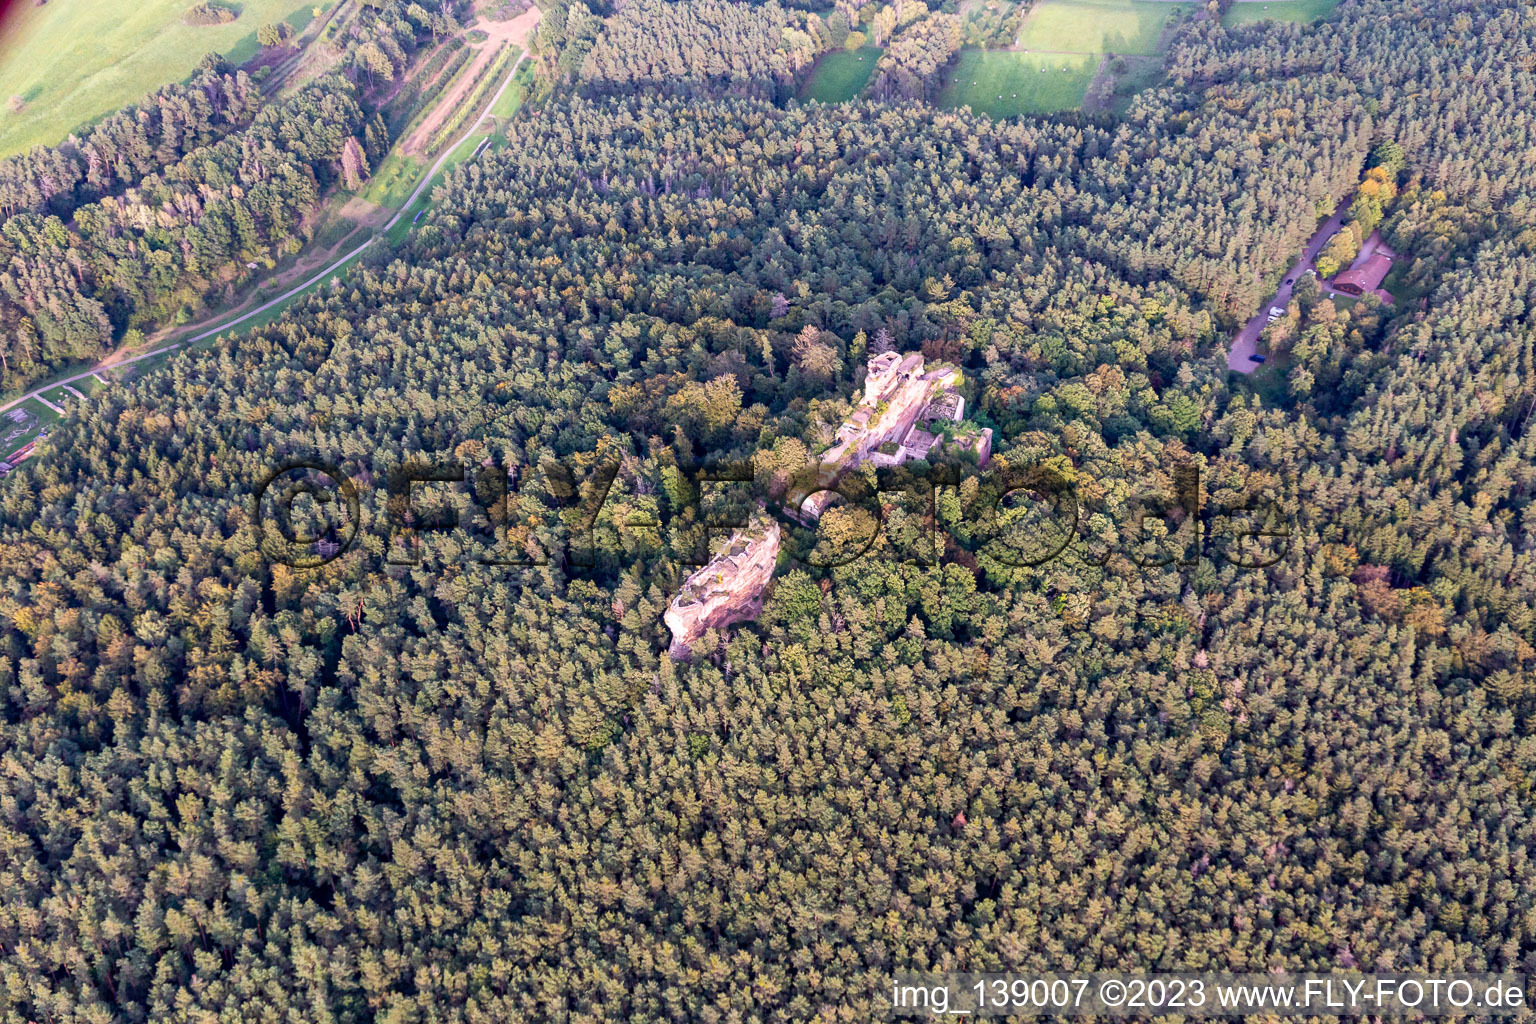 Drachenfels Castle in Busenberg in the state Rhineland-Palatinate, Germany from above